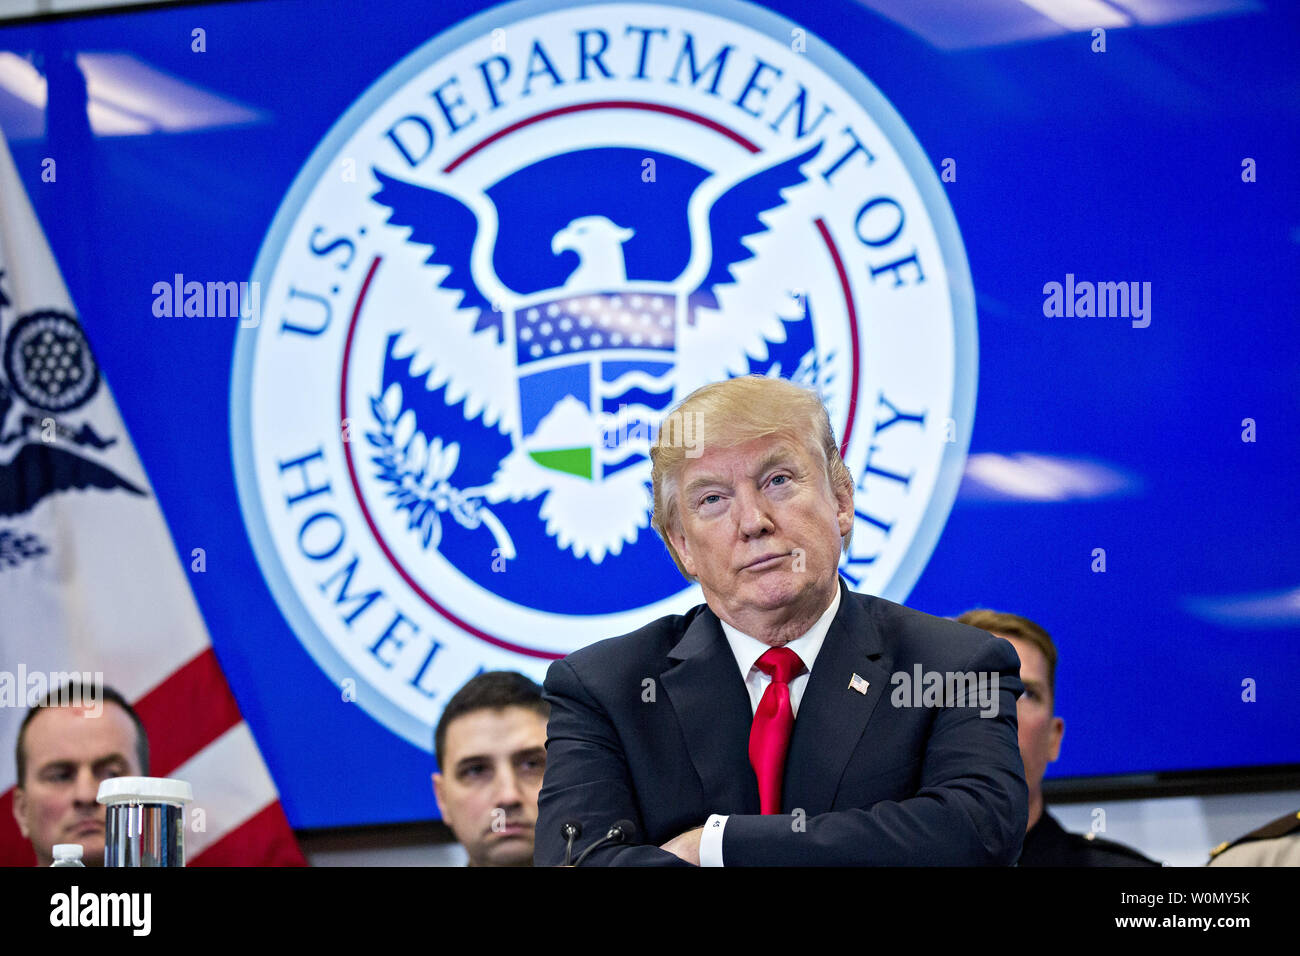 U.S. President Donald Trump listens while participating in a Customs and Border Protection (CBP) roundtable discussion after touring the CBP National Targeting Center in Sterling, Virginia, U.S., on Friday, Feb. 2, 2018. Trump is looking to ratchet up pressure on lawmakers to consider the immigration proposal he unveiled in Tuesday's State of the Union using the visit as an opportunity to again argue his proposal would bolster the country's borders.   Photo by Andrew Harrer/UPI Stock Photo